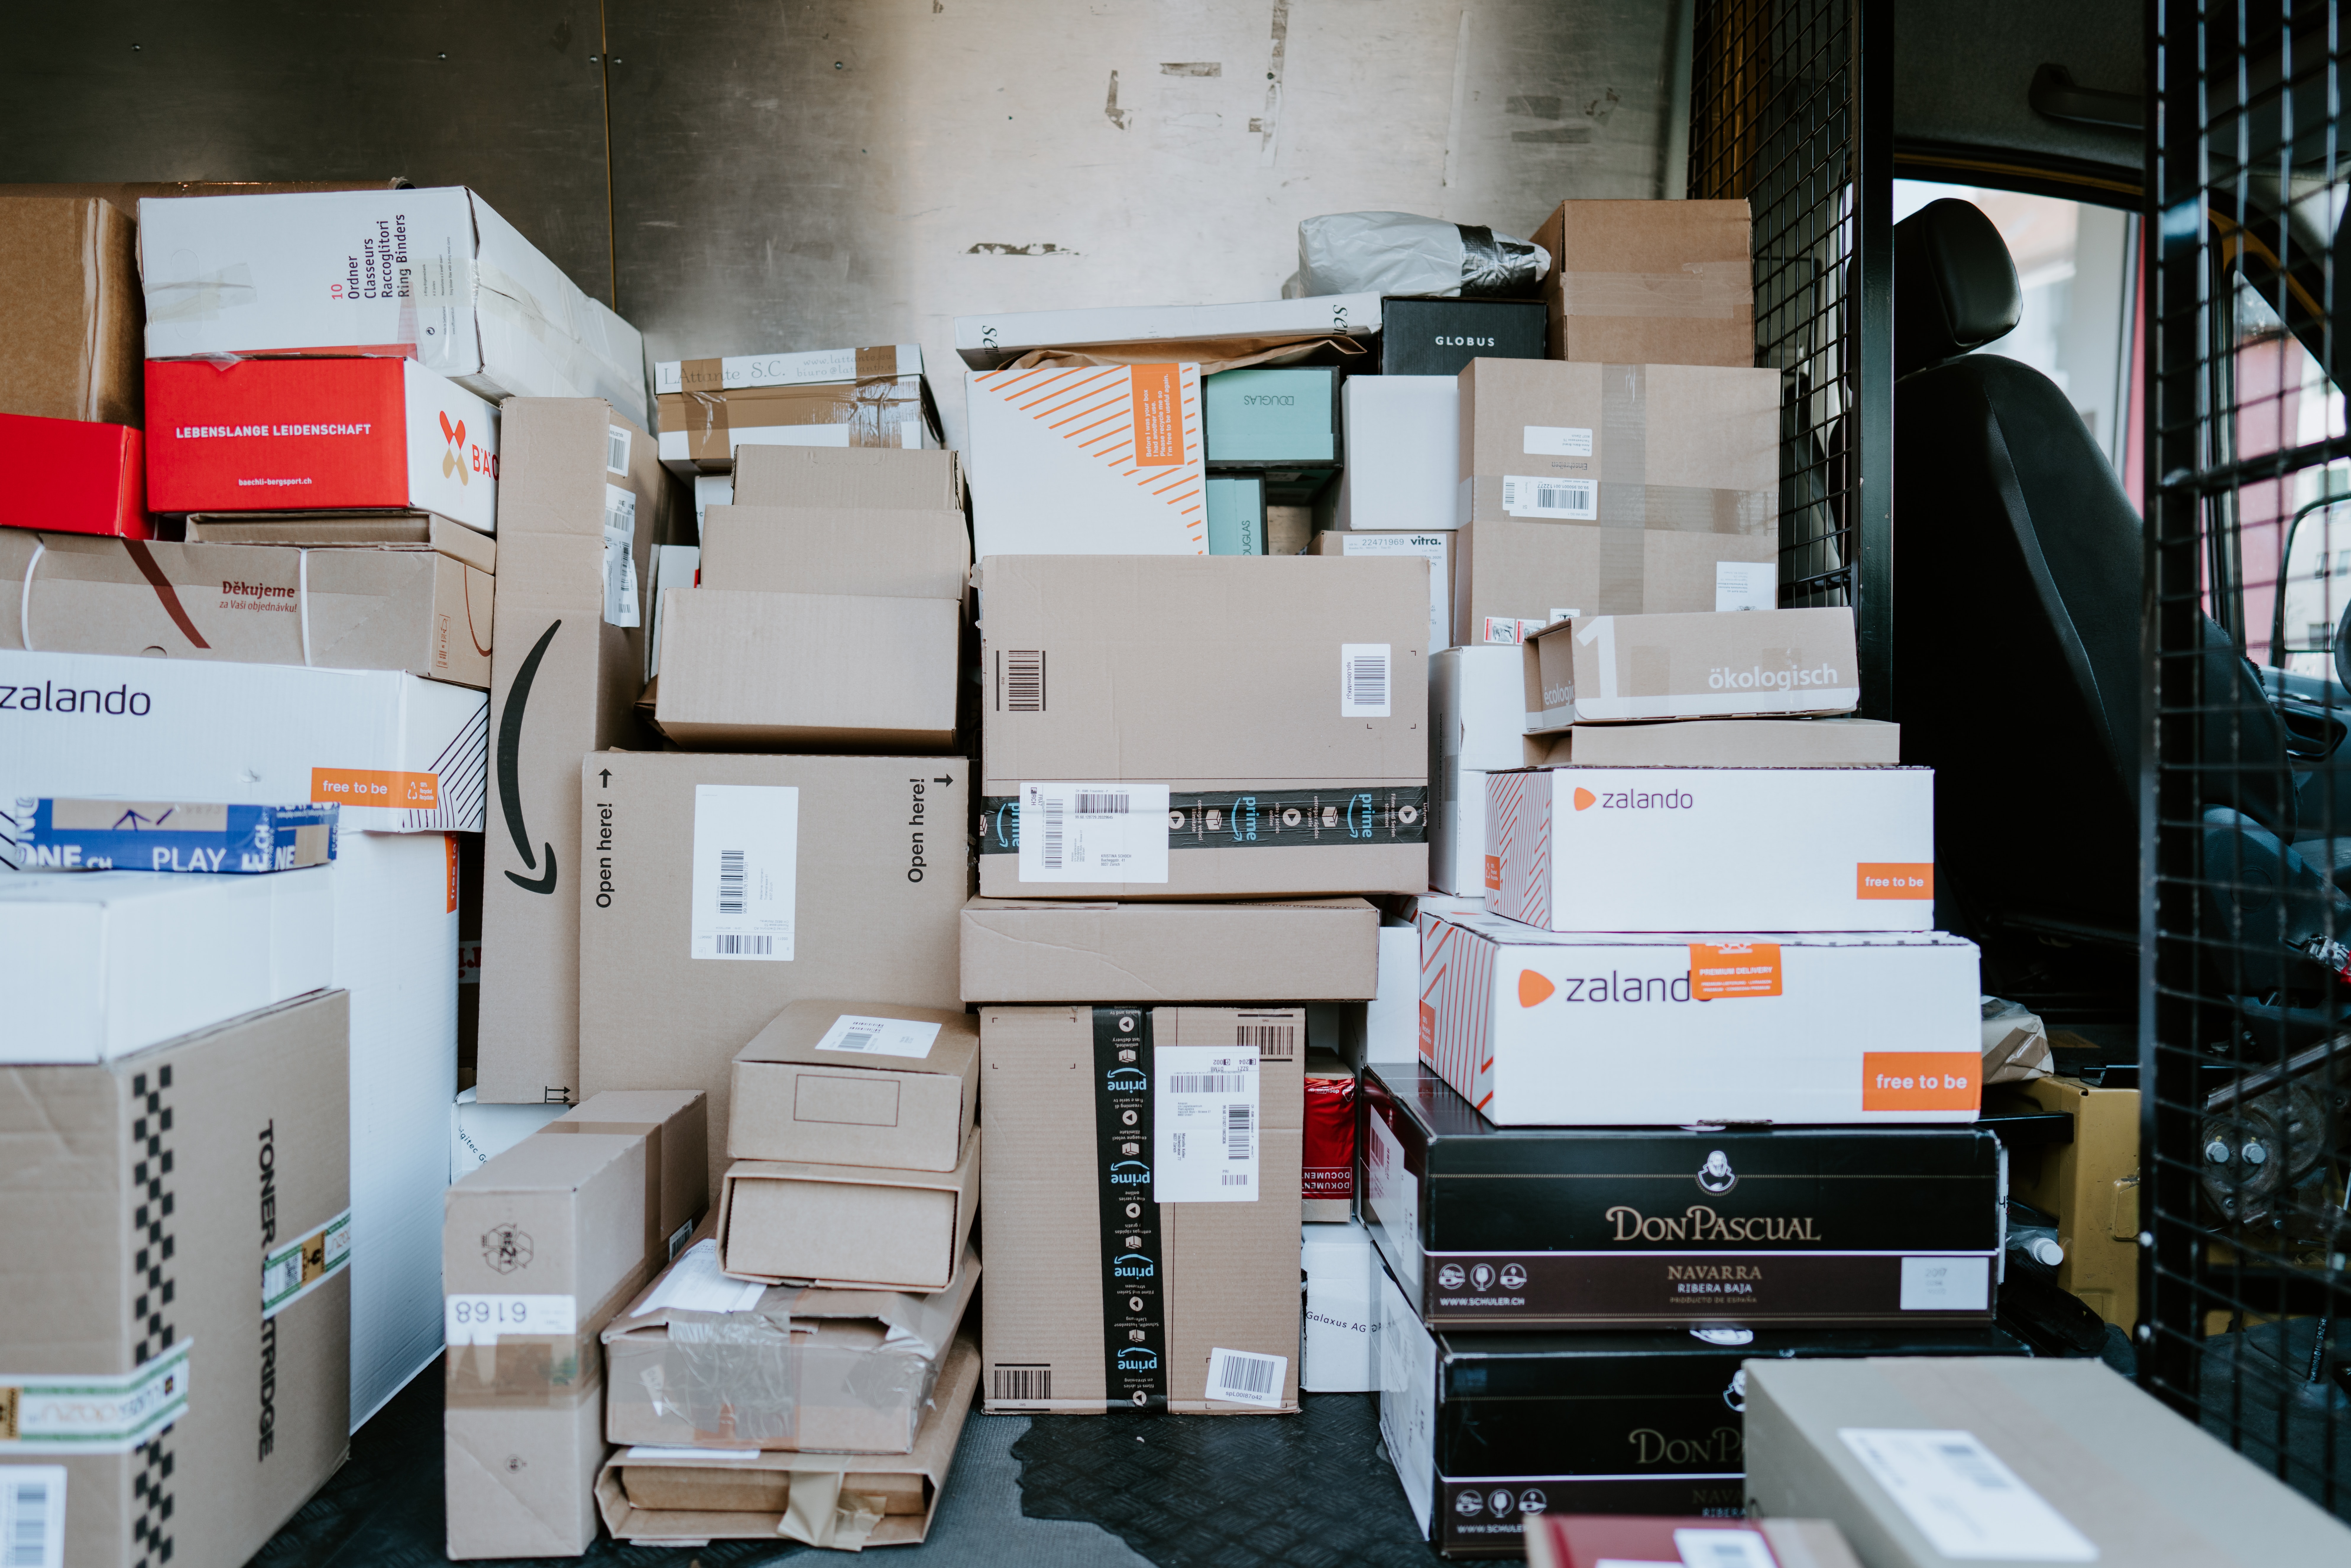 boxes piled up in a storeroom.